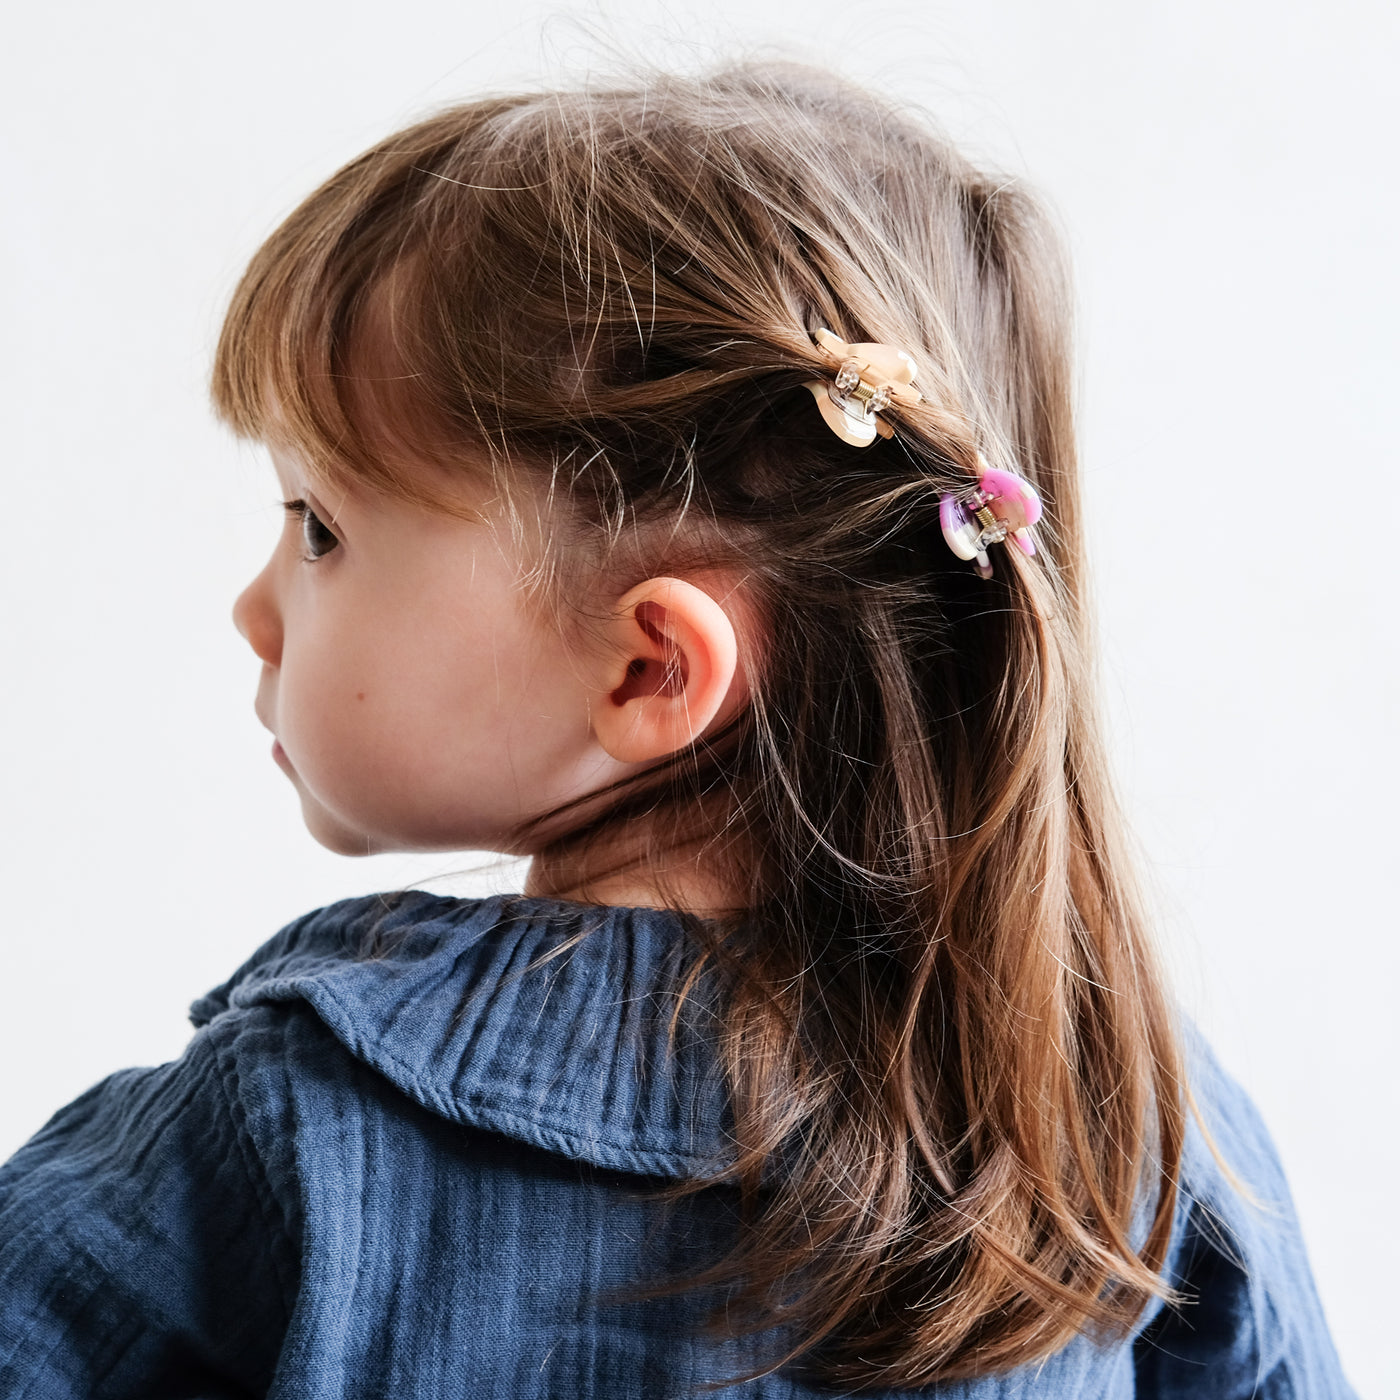 Sweet little dark haired girl looking over her shoulder showing hair clipped back by two colourful, fun little heart shaped bulldog clips